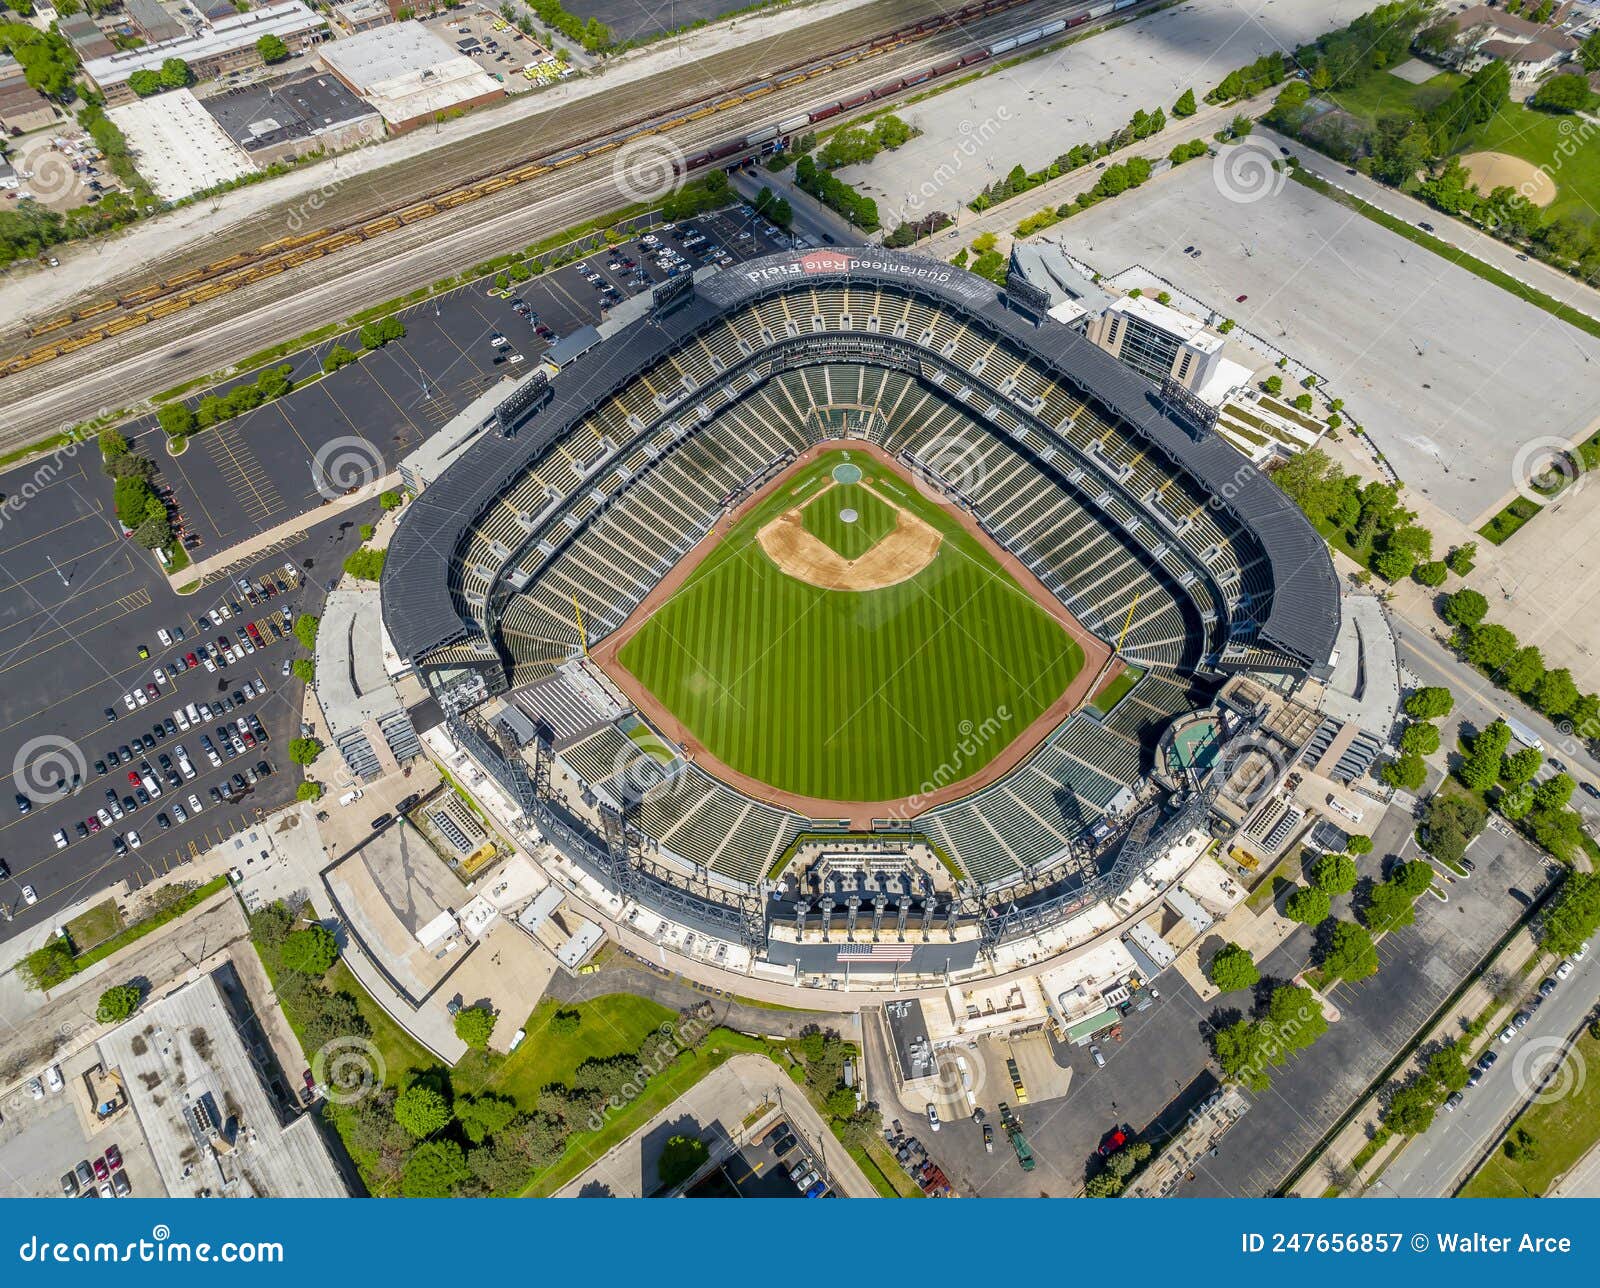 Aerial View of Guaranteed Rate Field, Home of the Chicago White